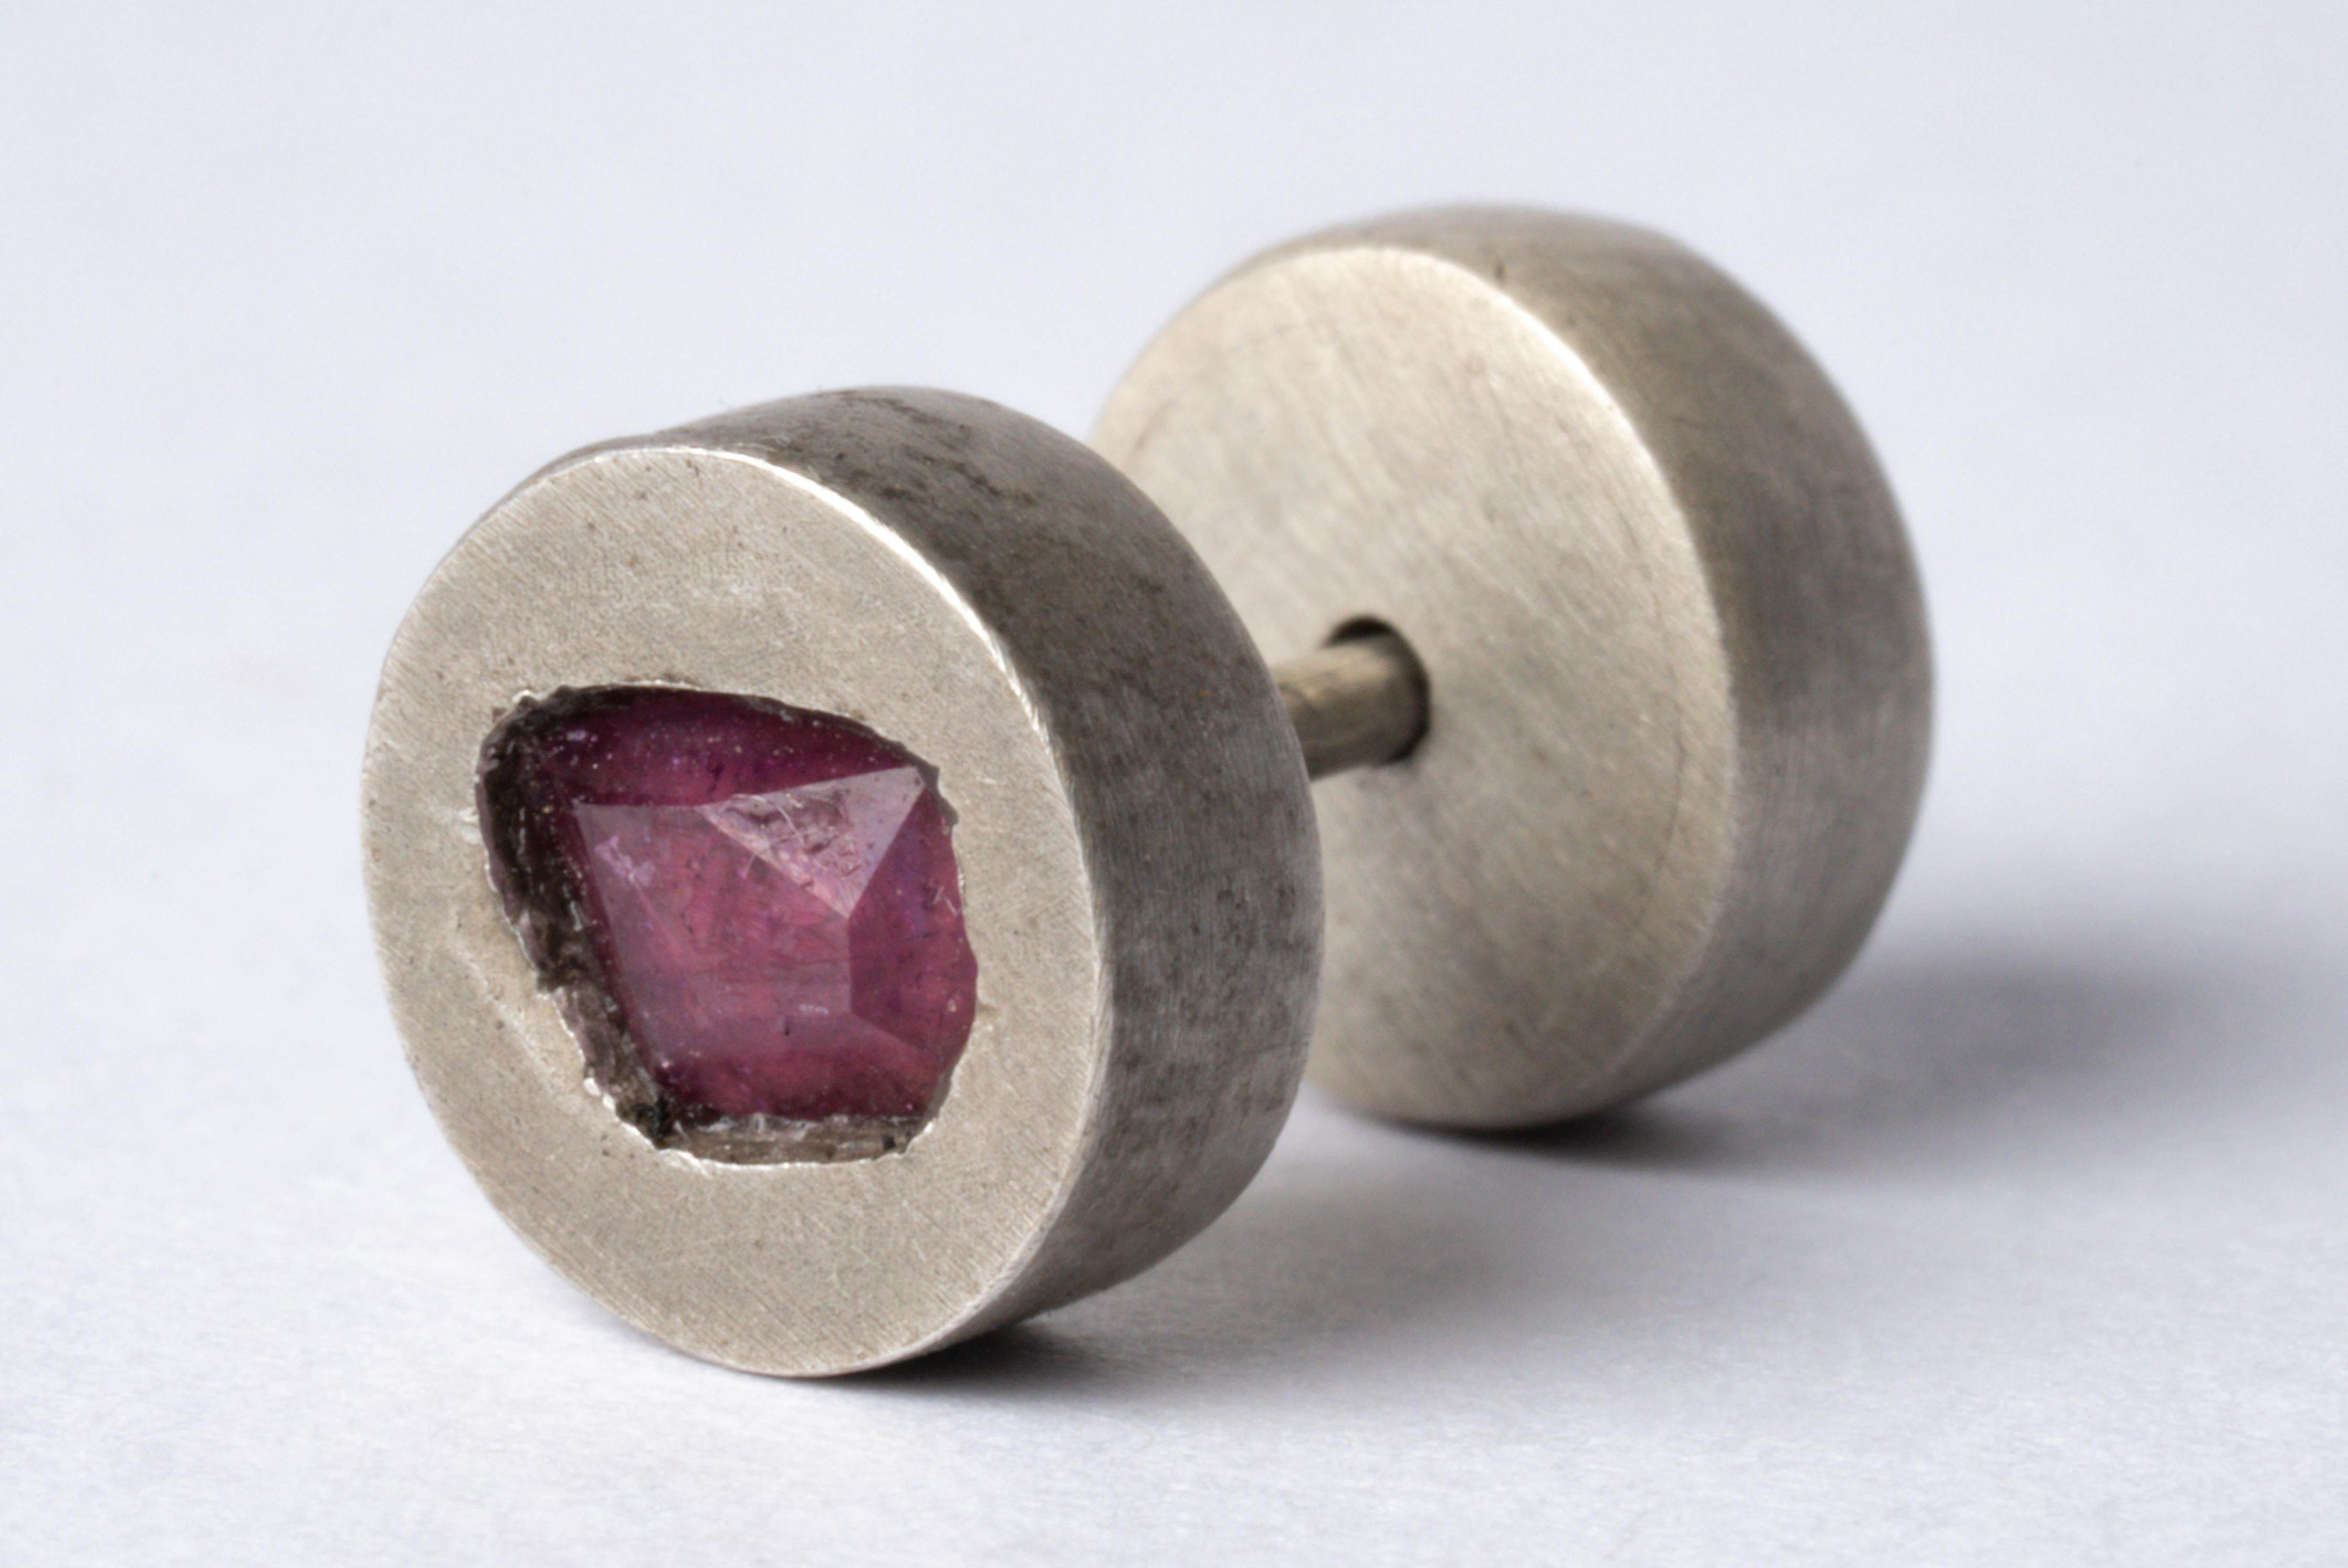 Stud earring in sterling silver and a slab of rough ruby (faceted). This item is made with a naturally occurring element and will vary from the photograph you see. Each piece is unique and this is what makes it special. 
Sold as a single piece.